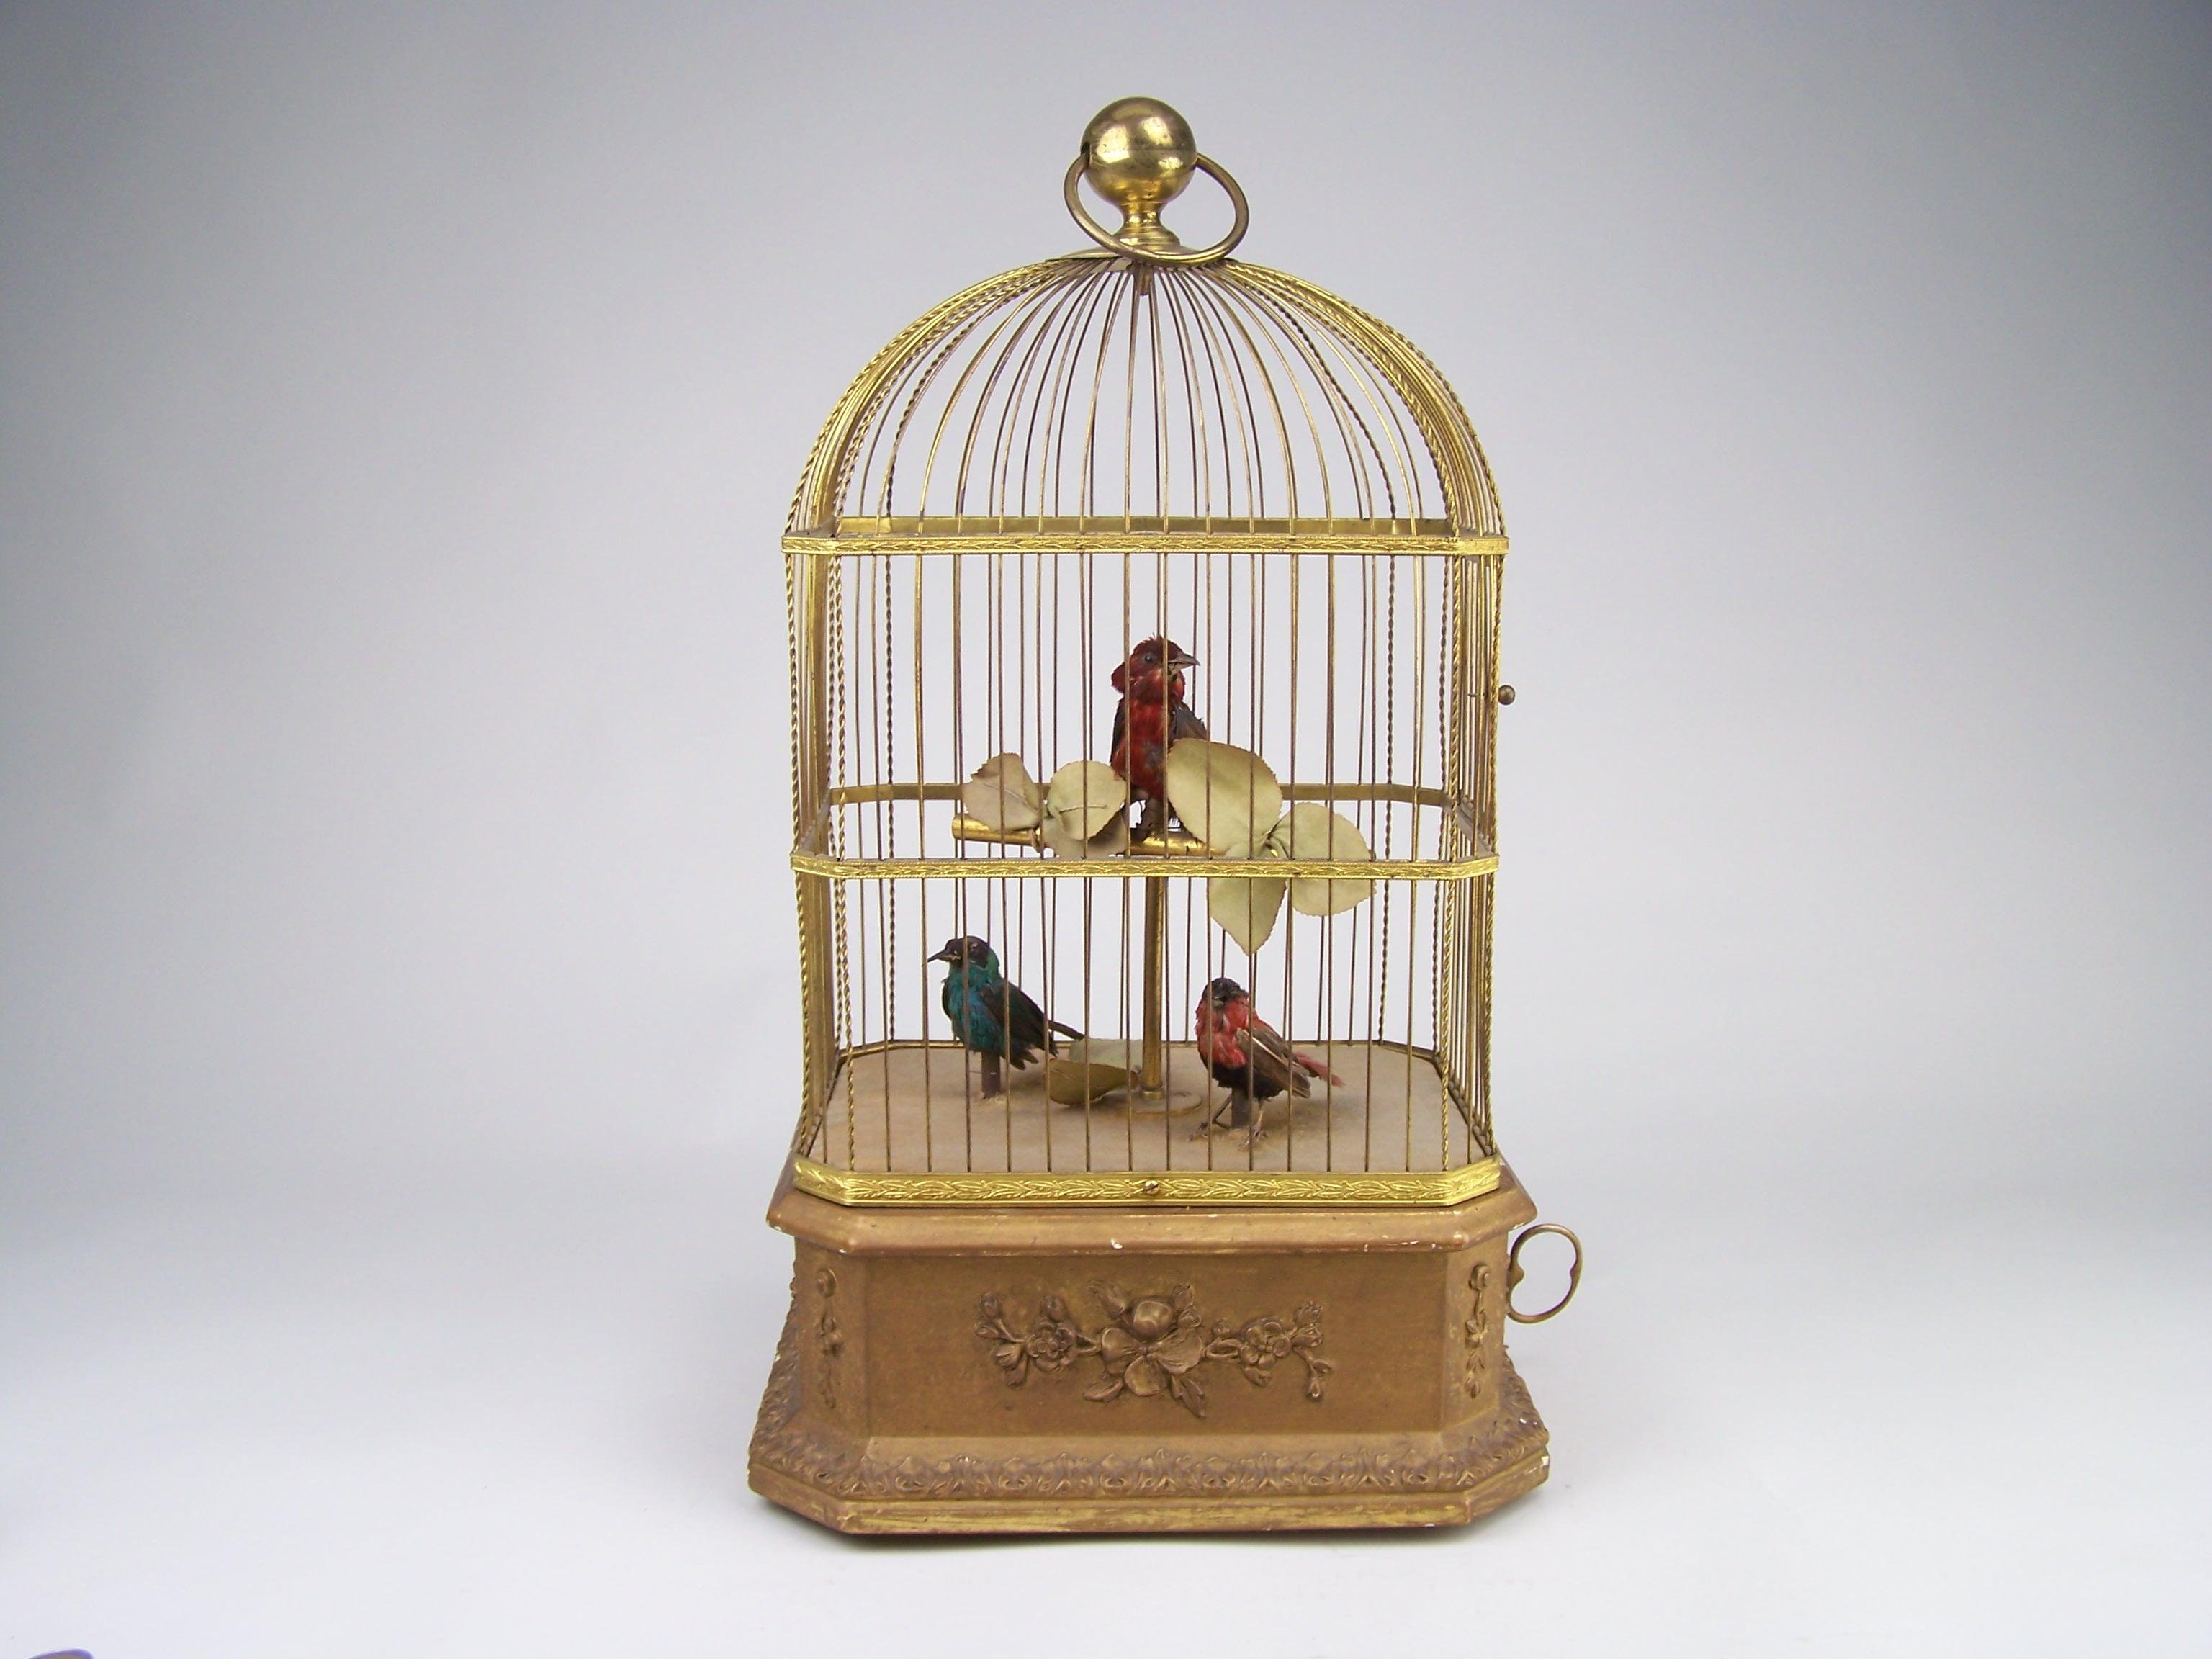 Rare and very decorative singing bird automaton.

Made in de 4th quarter of the 19th century by Bontems in Paris (France).

This singing bird cage has a wooden gilded base to conseal the mechanism. In the cage there are 3 original birds in a lovely